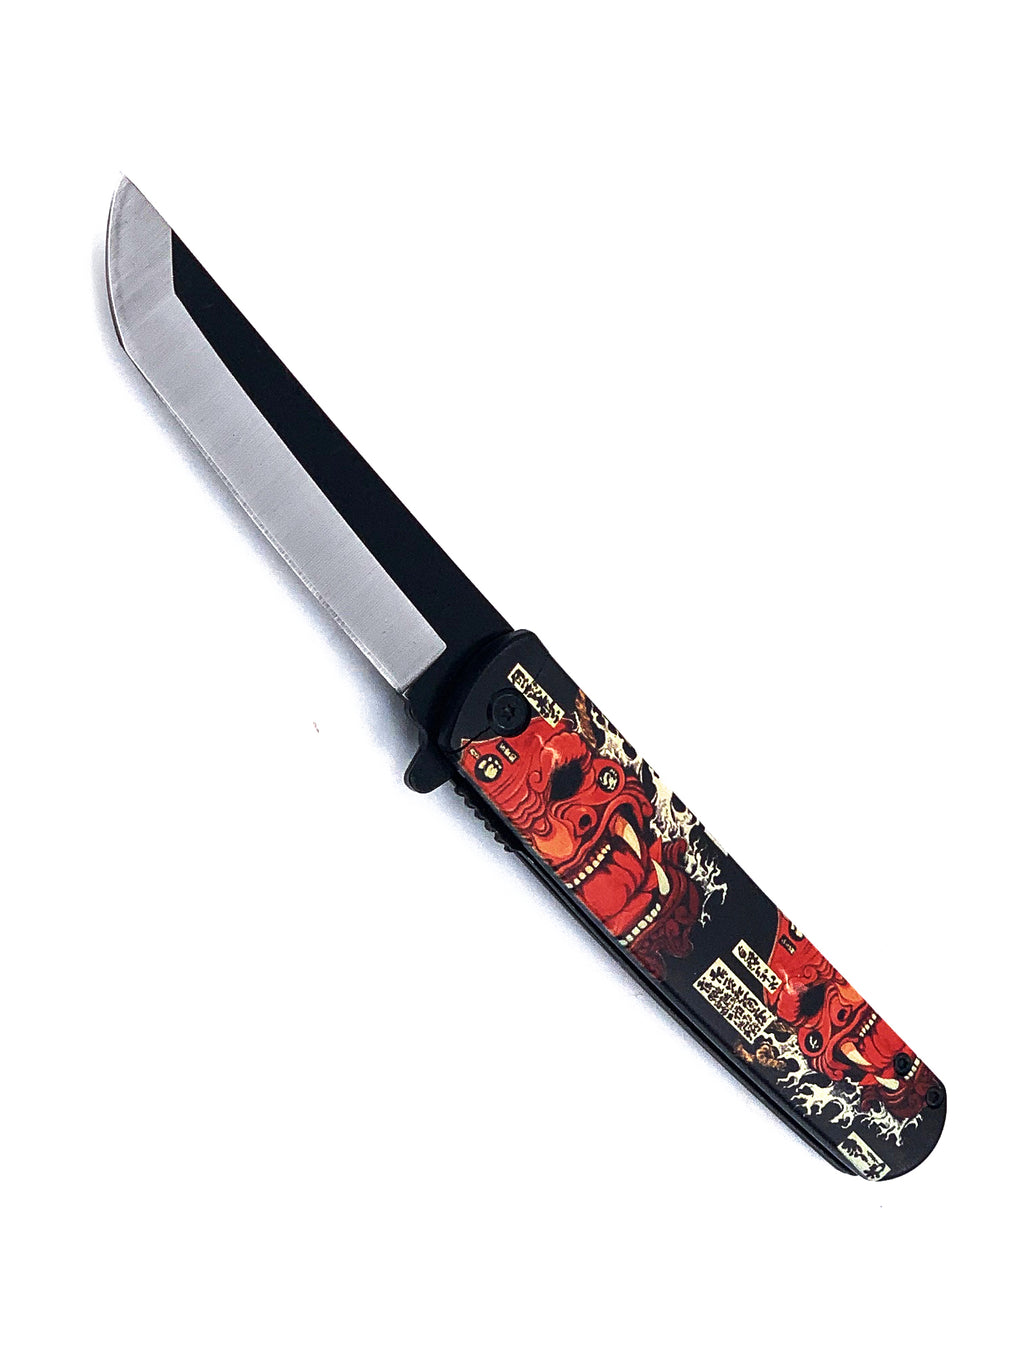 Fire Mask Samurai Spring Assisted Pocket Knife with Two Tone Rounded Tanto Blade